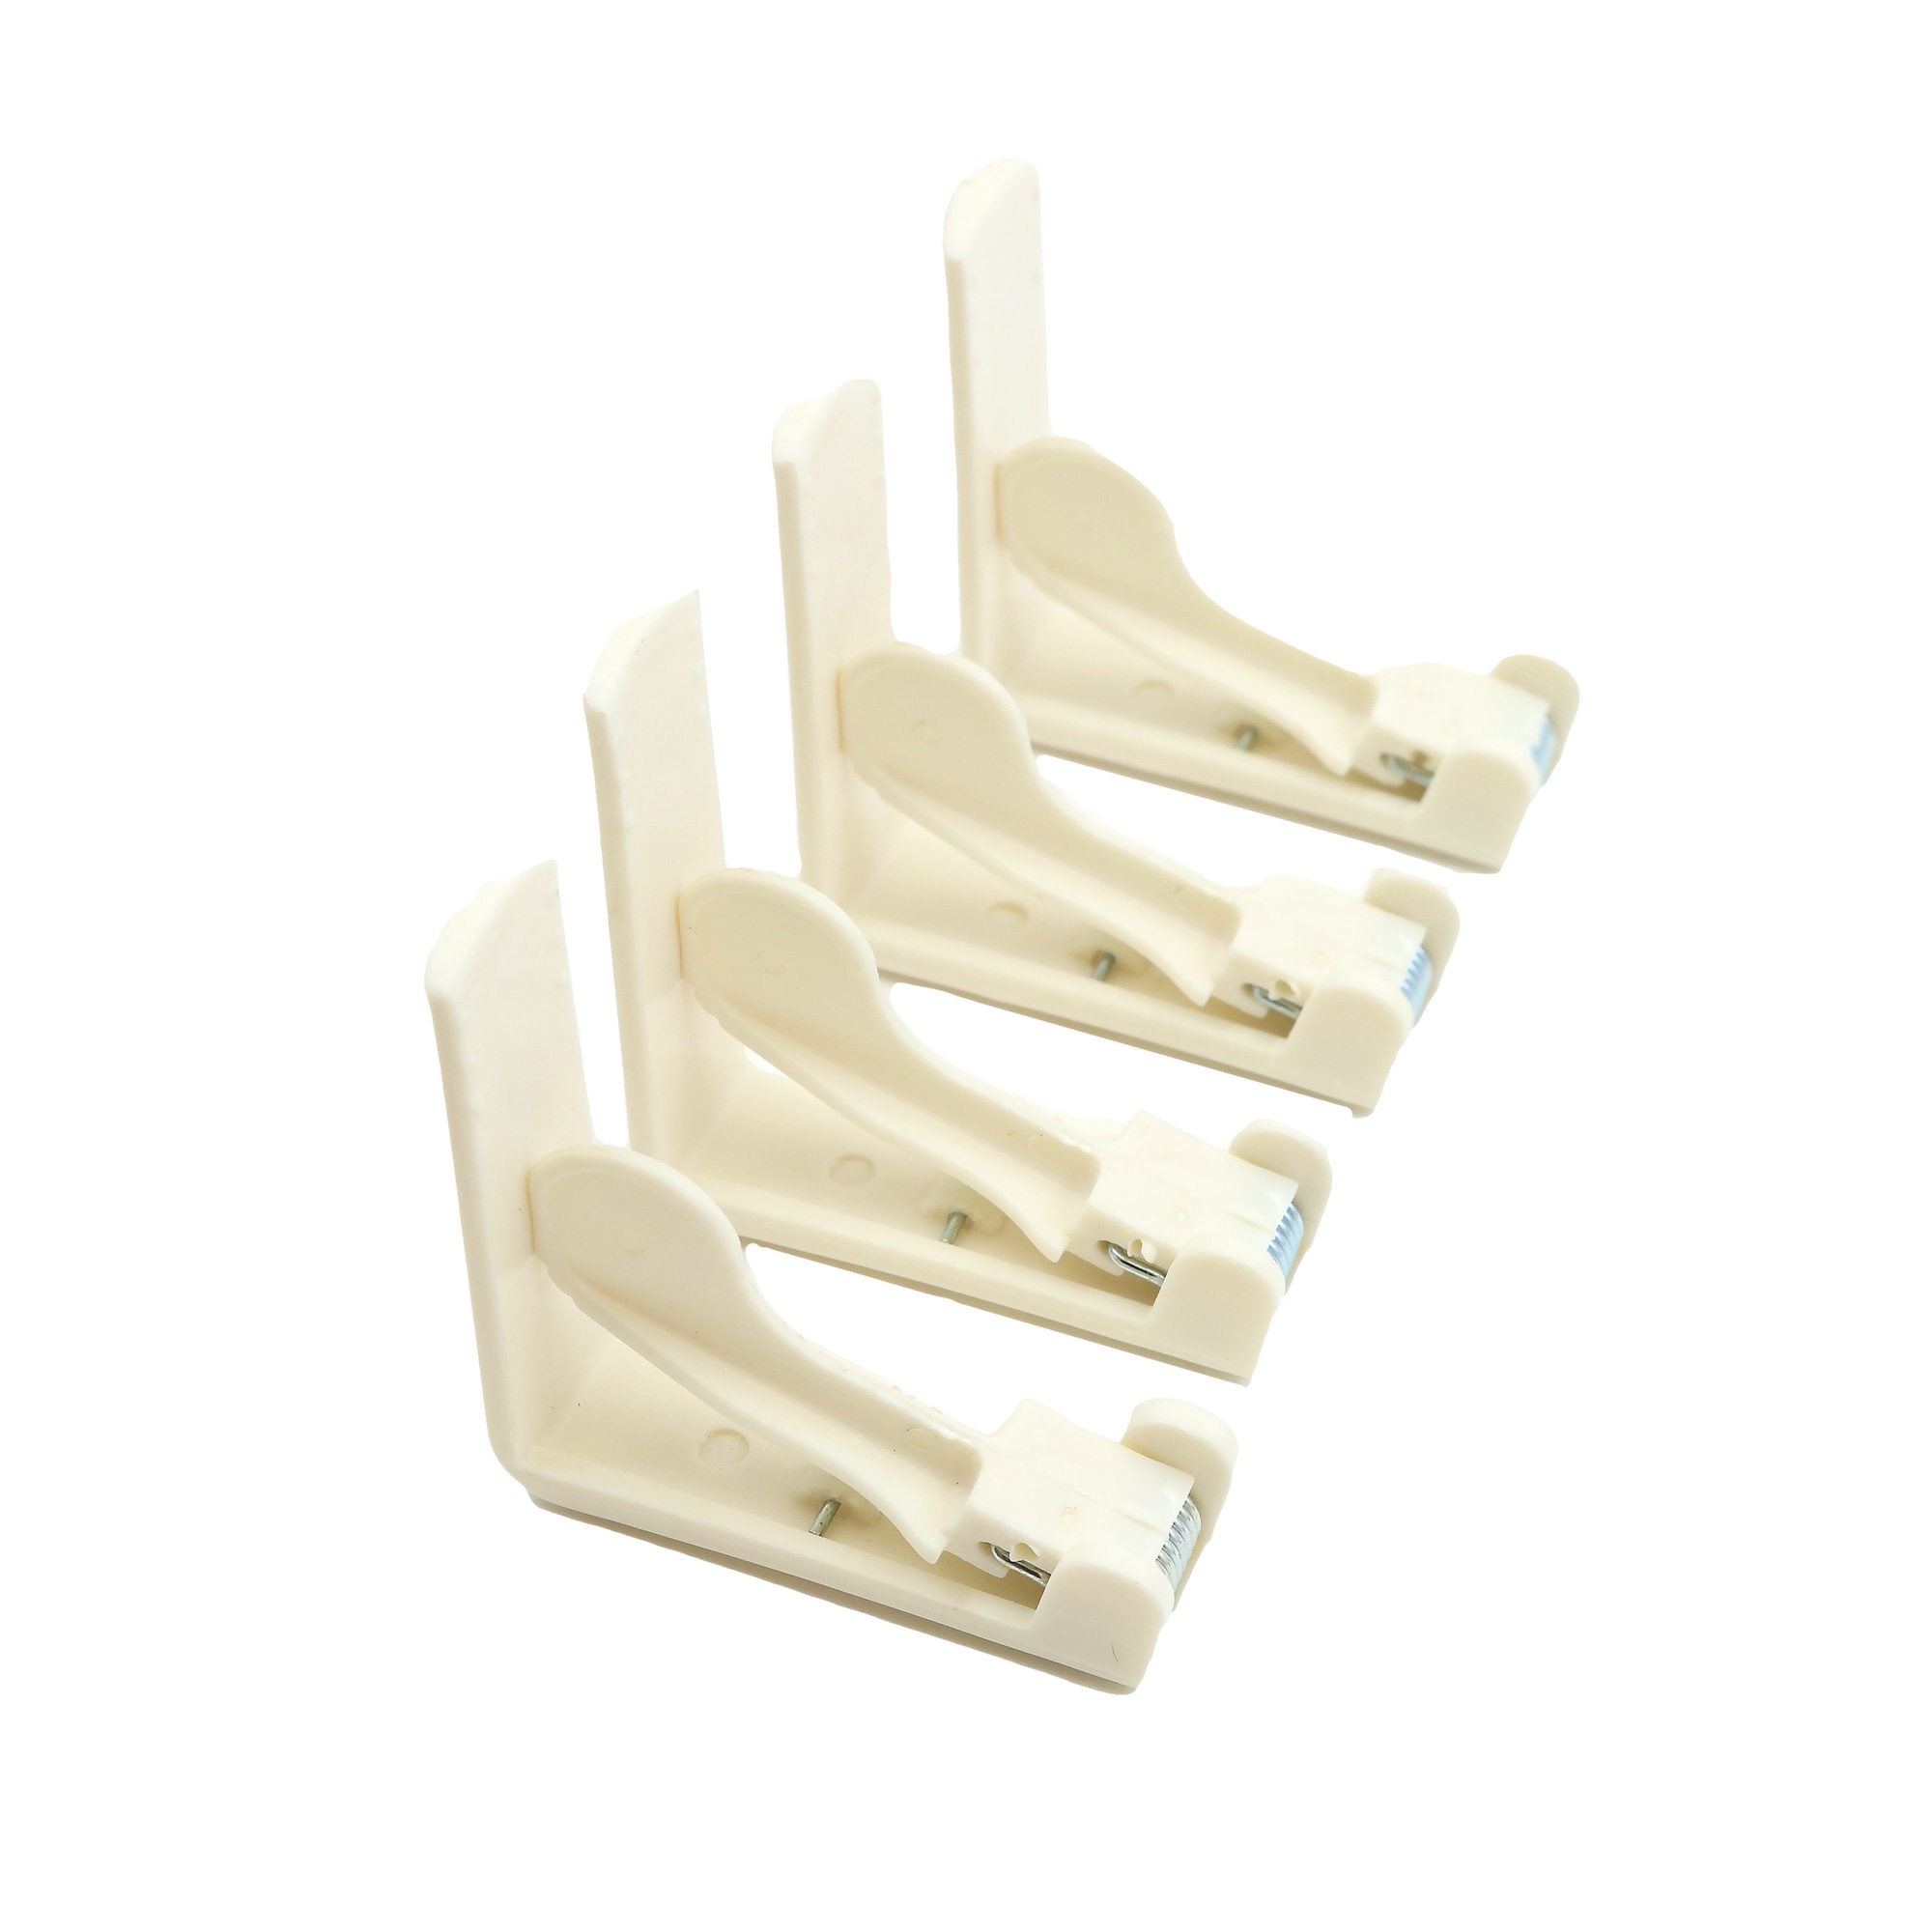 Tablecloth Clamps 4 Pack